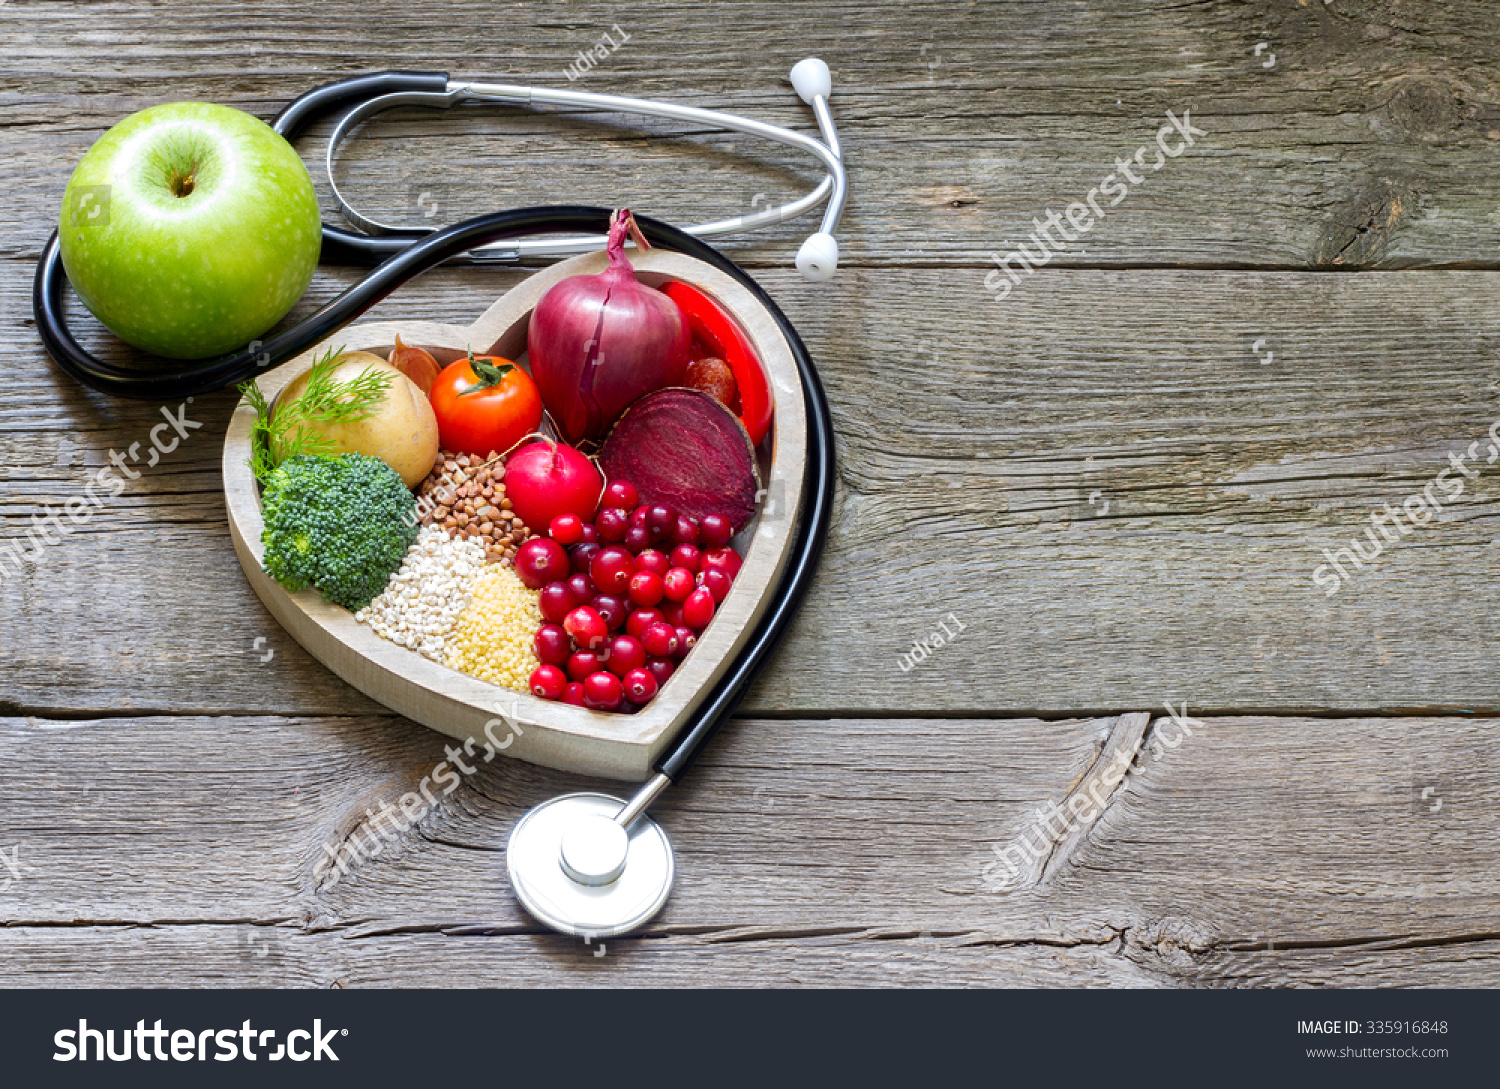 Healthy food in heart and cholesterol diet concept on vintage boards #335916848